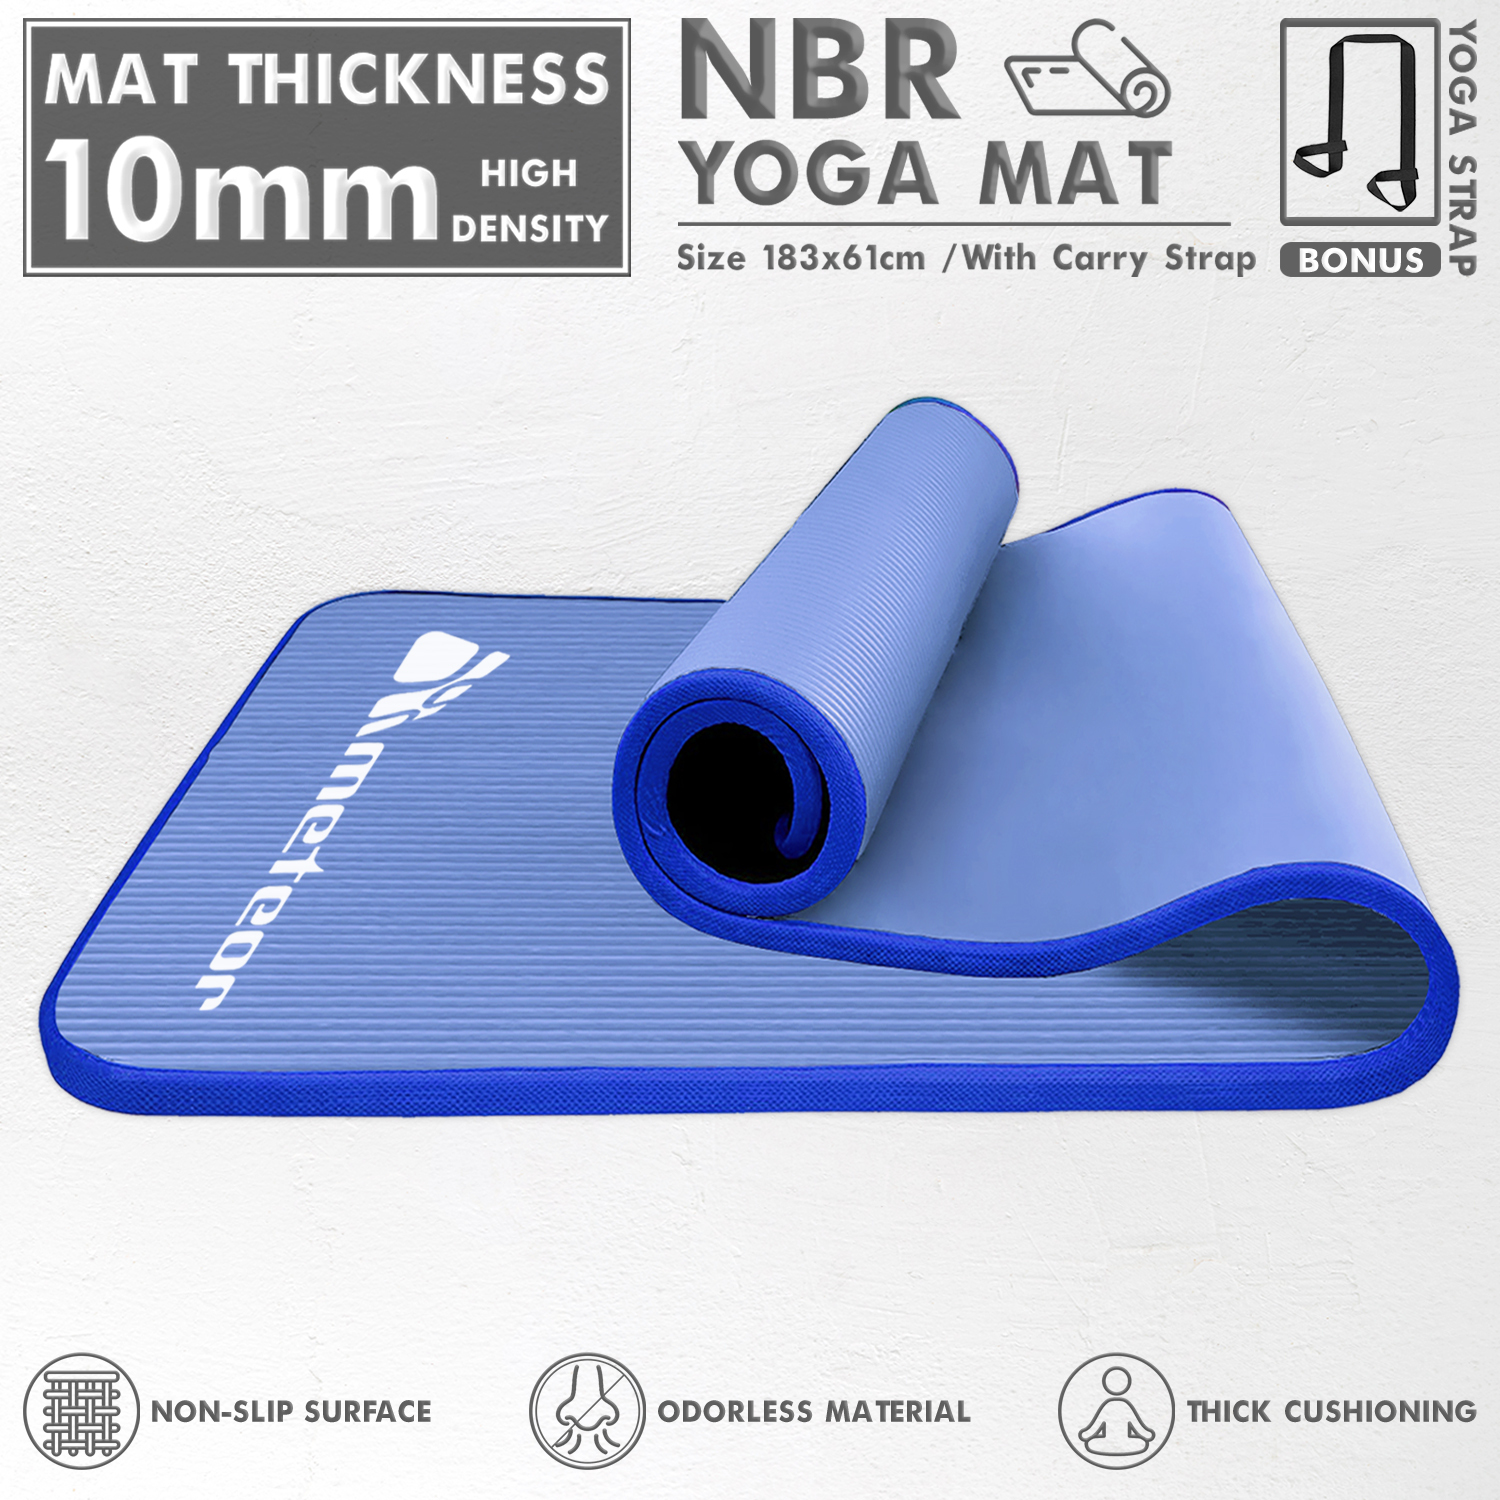 METEOR 10mm Dual-Tone NBR Yoga Mat with Alignment Lines,183x65cm